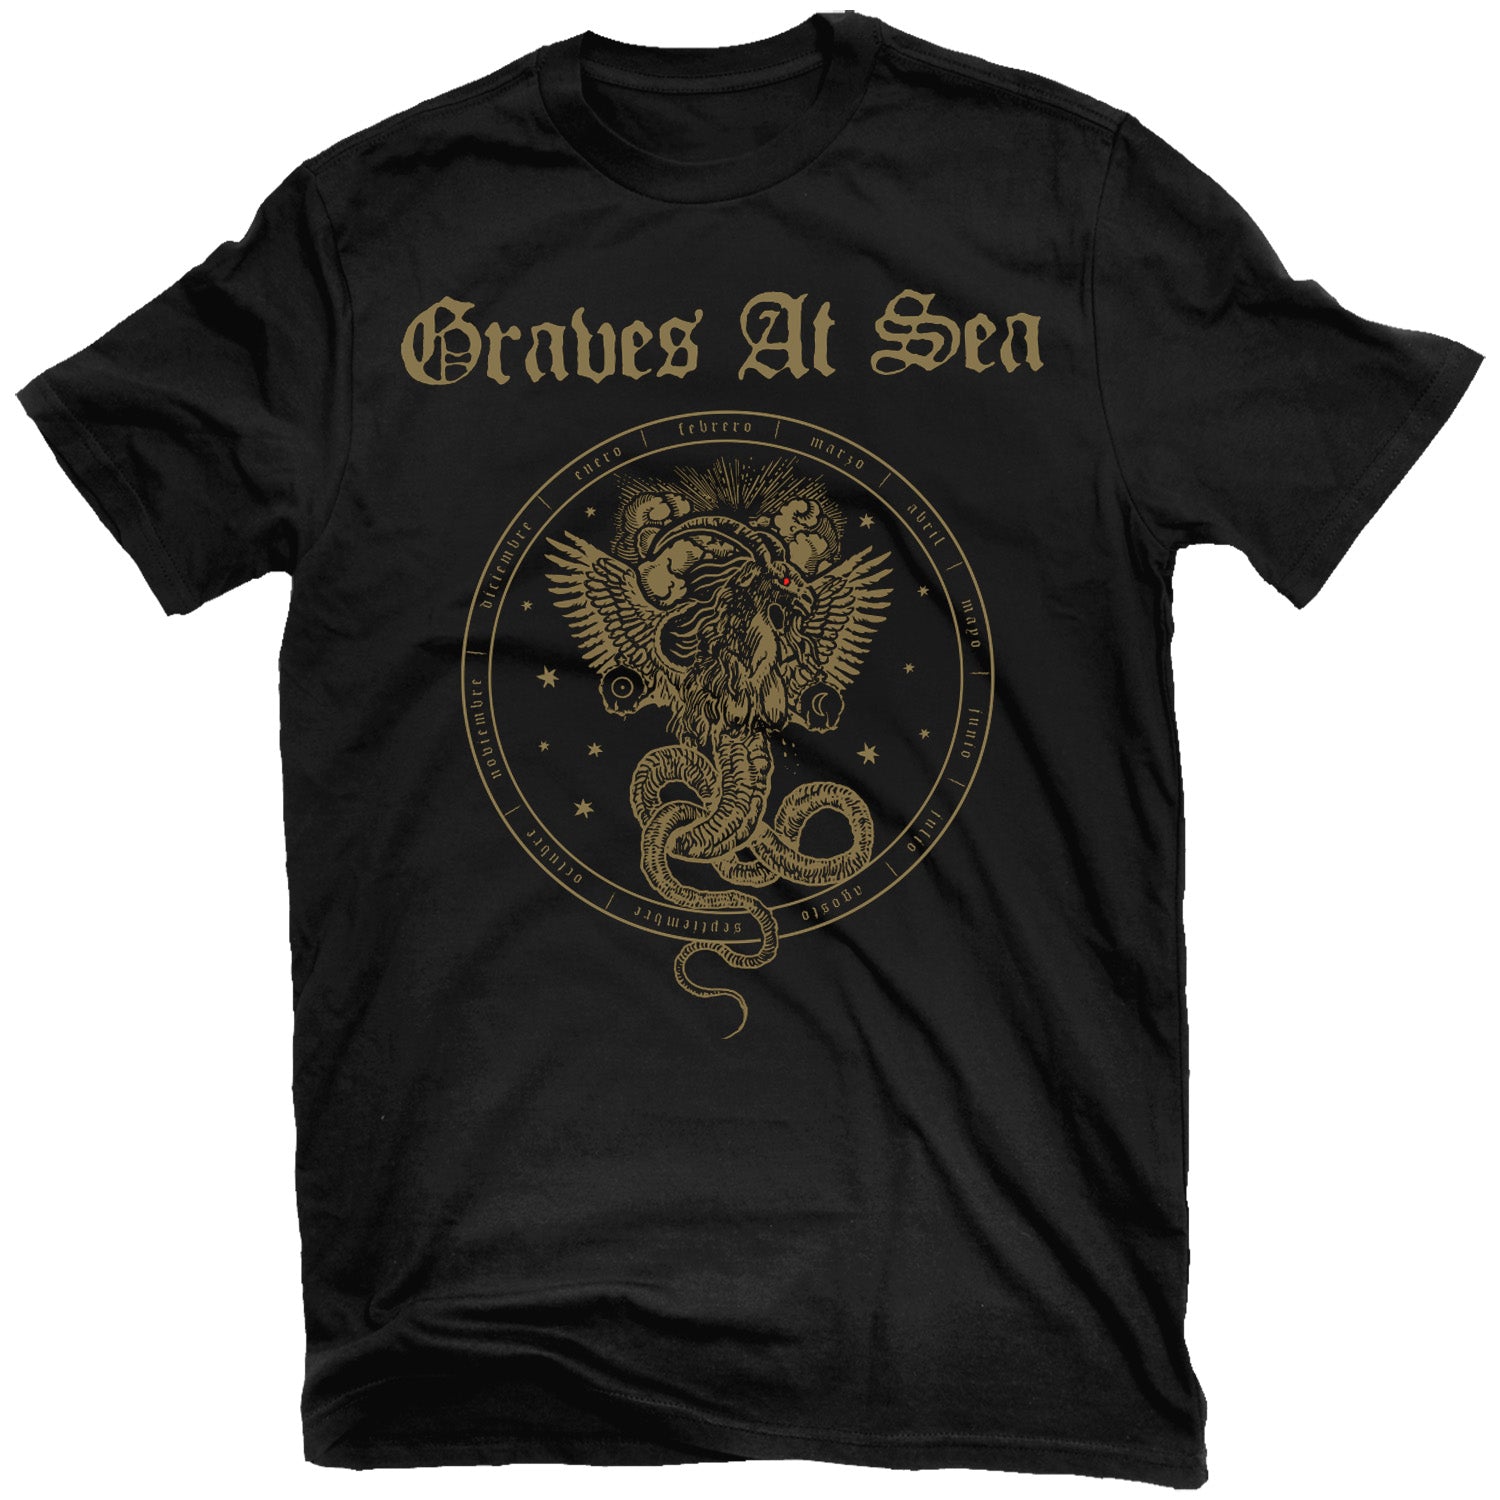 Graves at Sea "The Curse That Is" T-Shirt